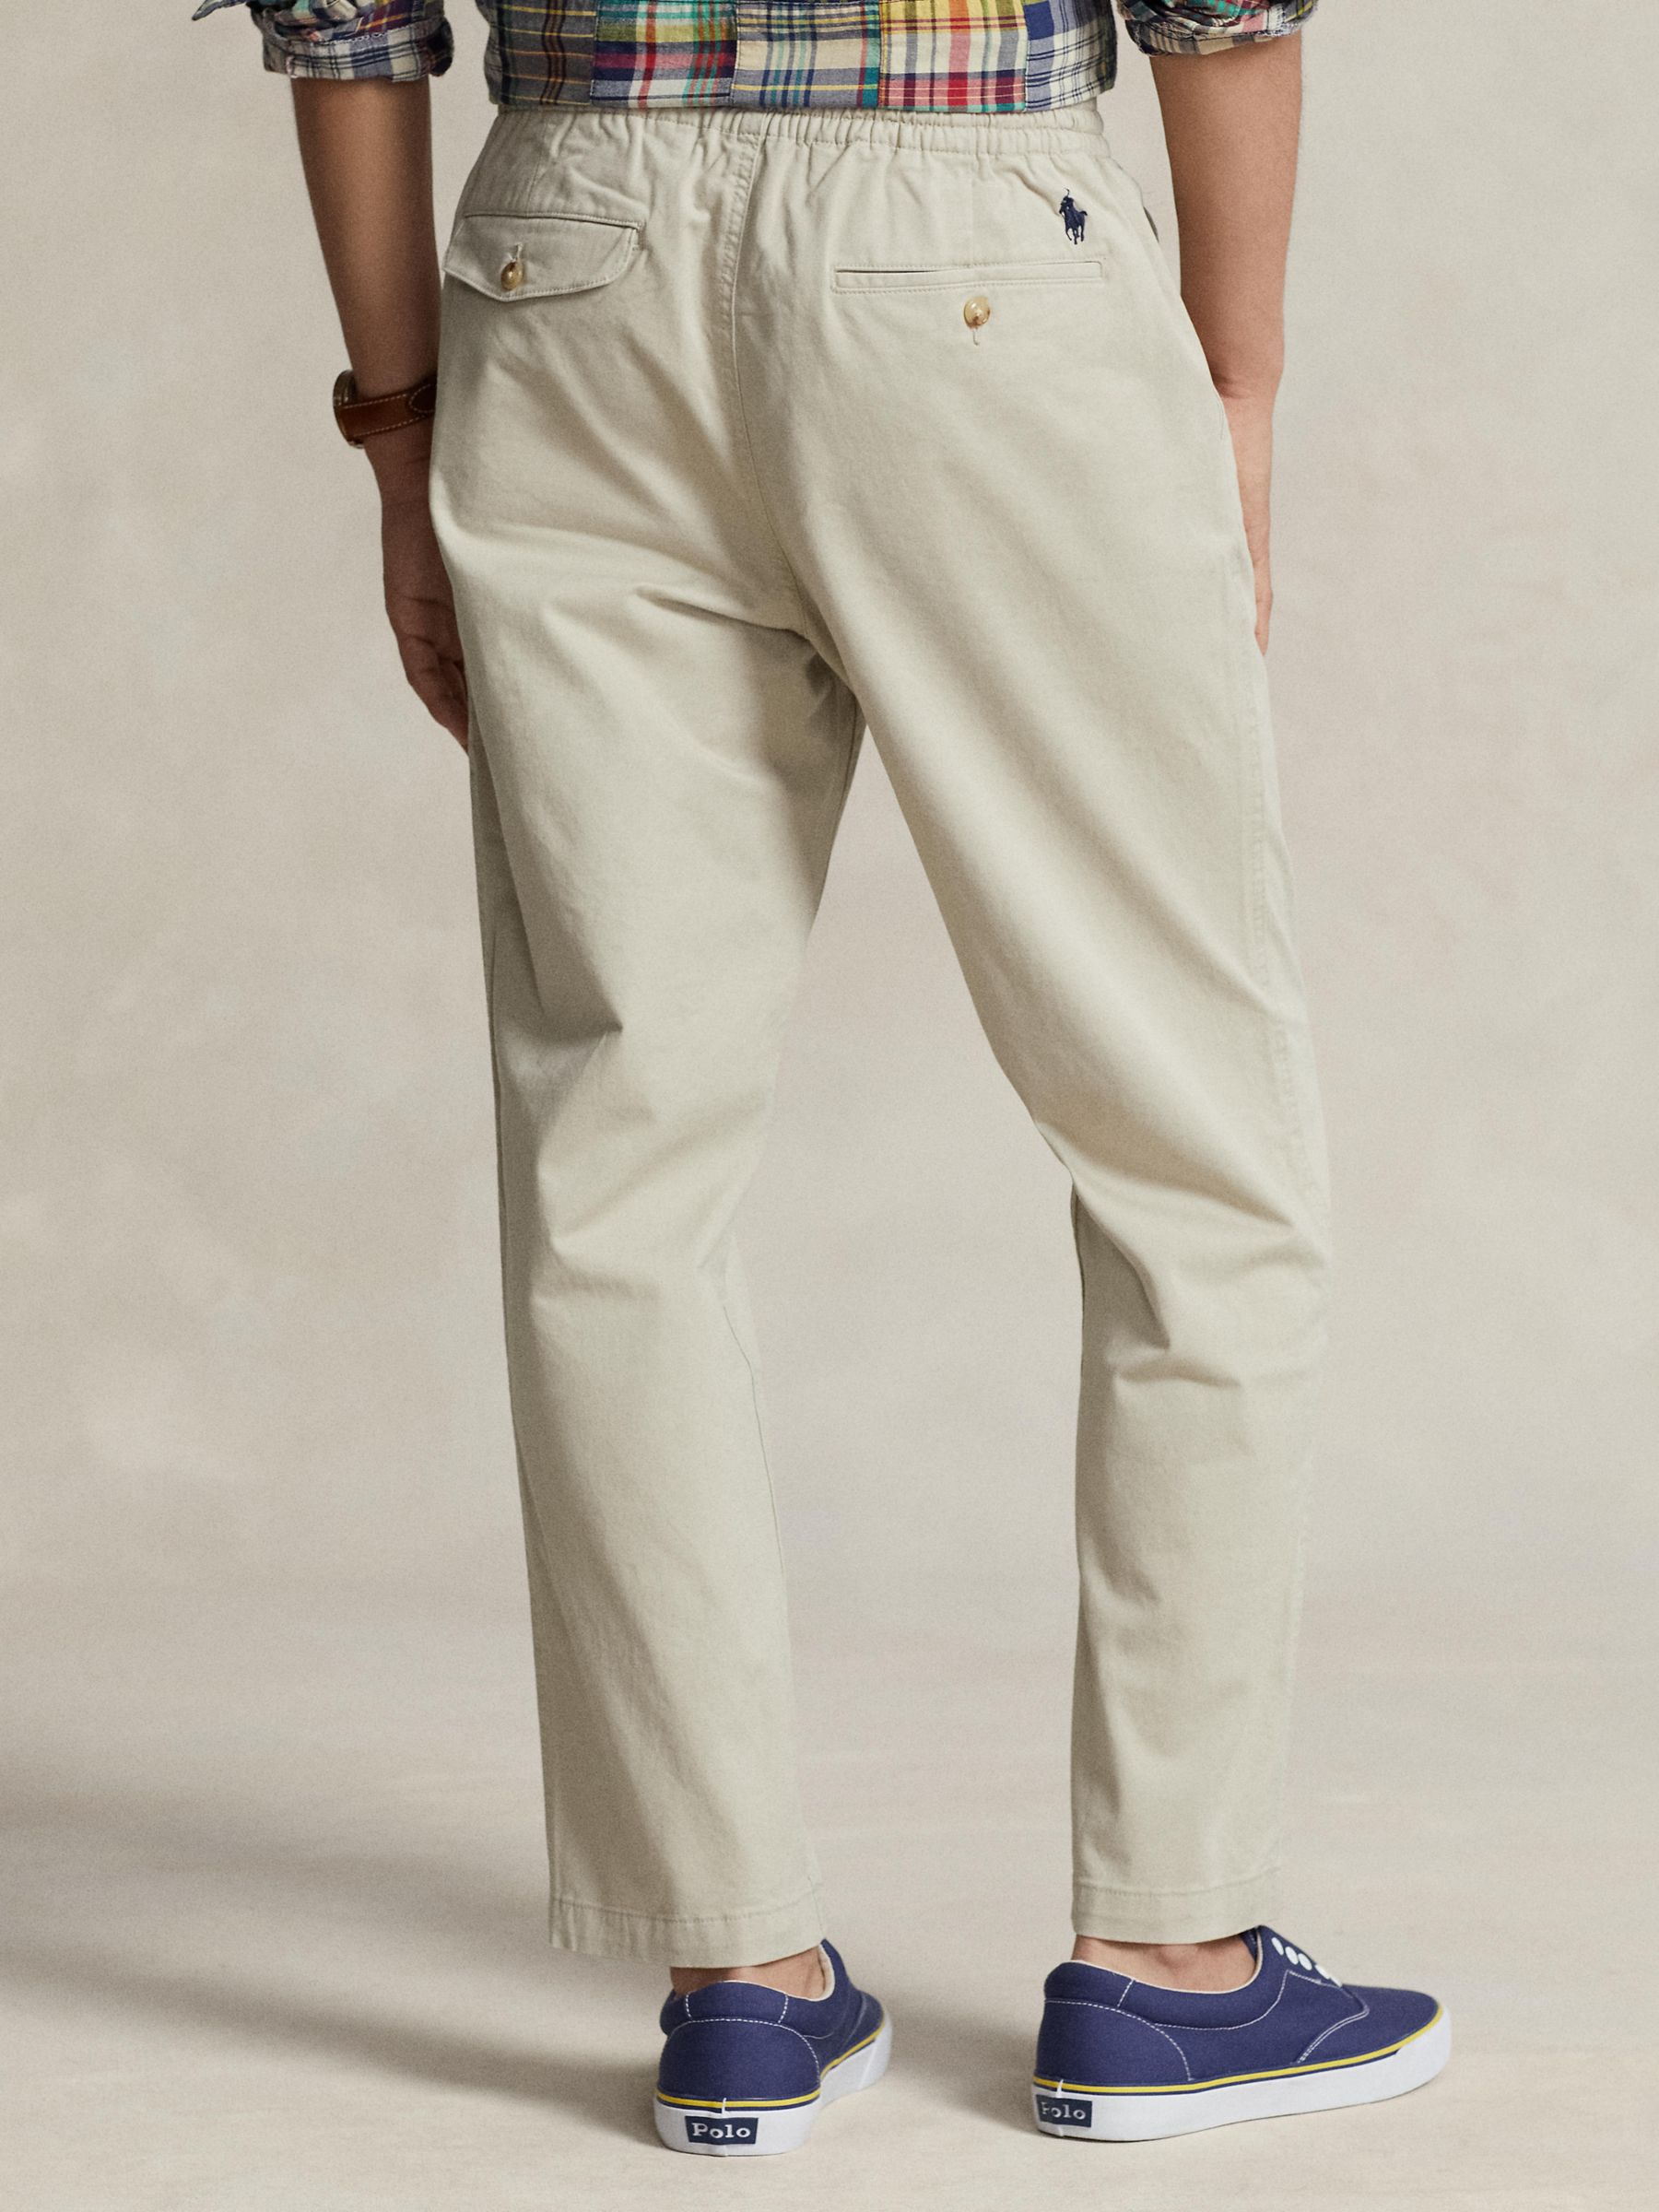 Buy Polo Ralph Lauren Prepster Classic Fit Chino Trousers Online at johnlewis.com